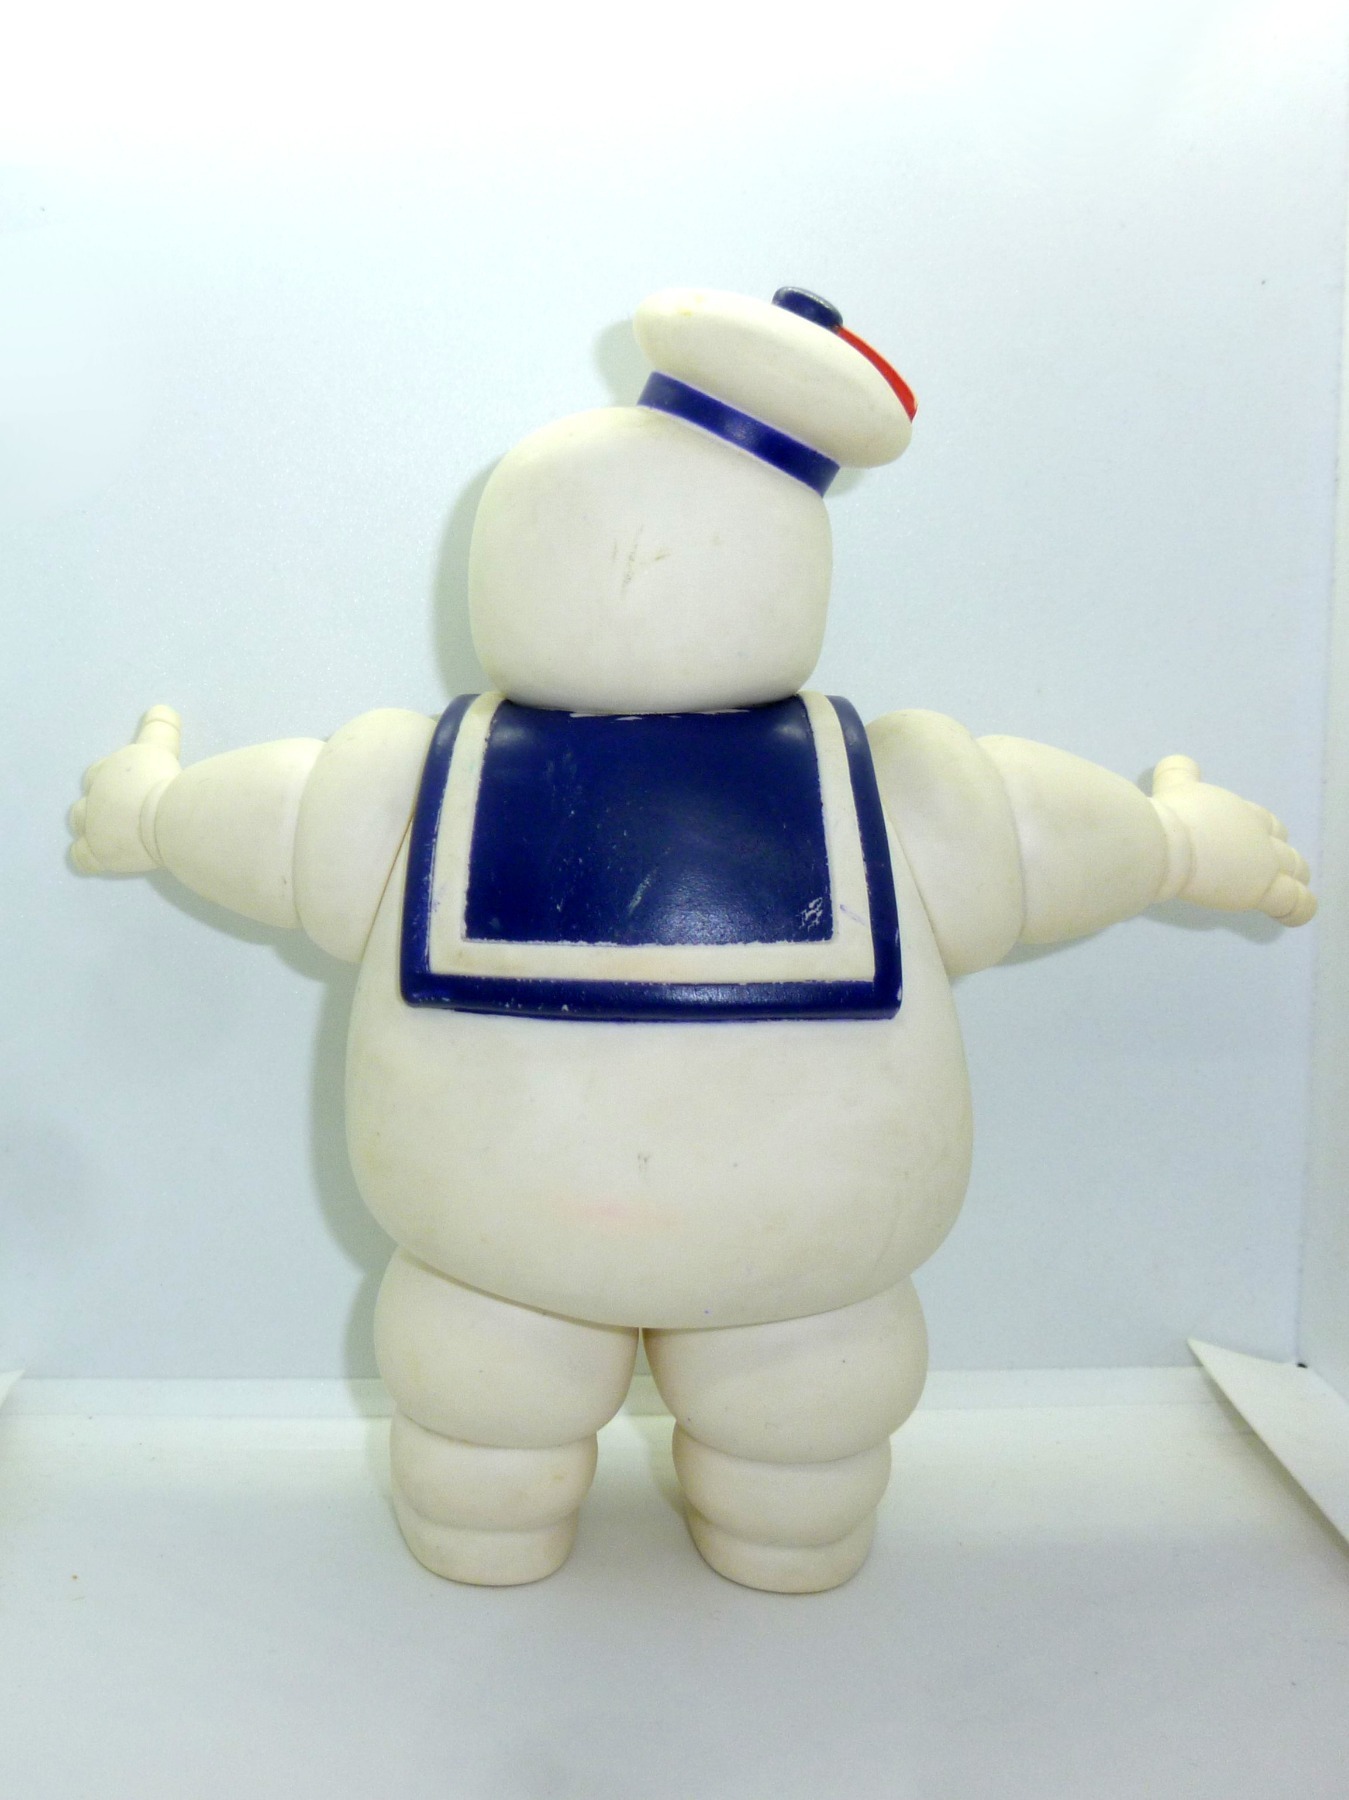 Stay-Puft Marshmallow Man Kenner 1986 3